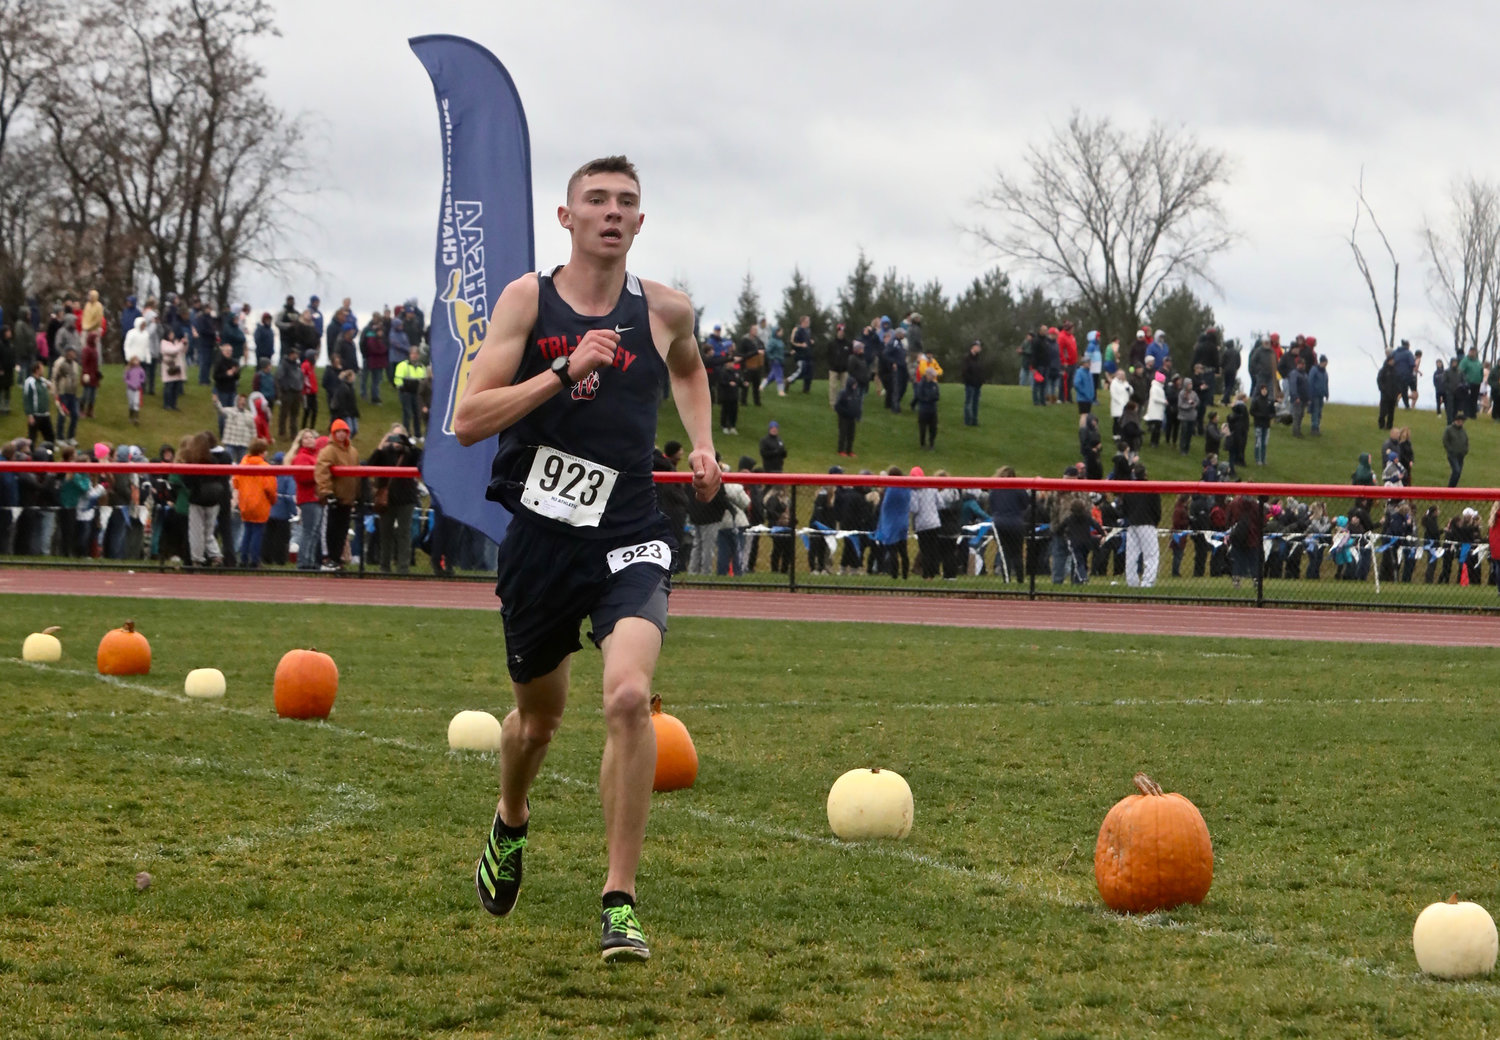 Tri-Valley senior Adam Furman approaches the finish line to become the 2022 NYSPHSAA Class D Cross-Country champion. His winning time was 16:21.20.